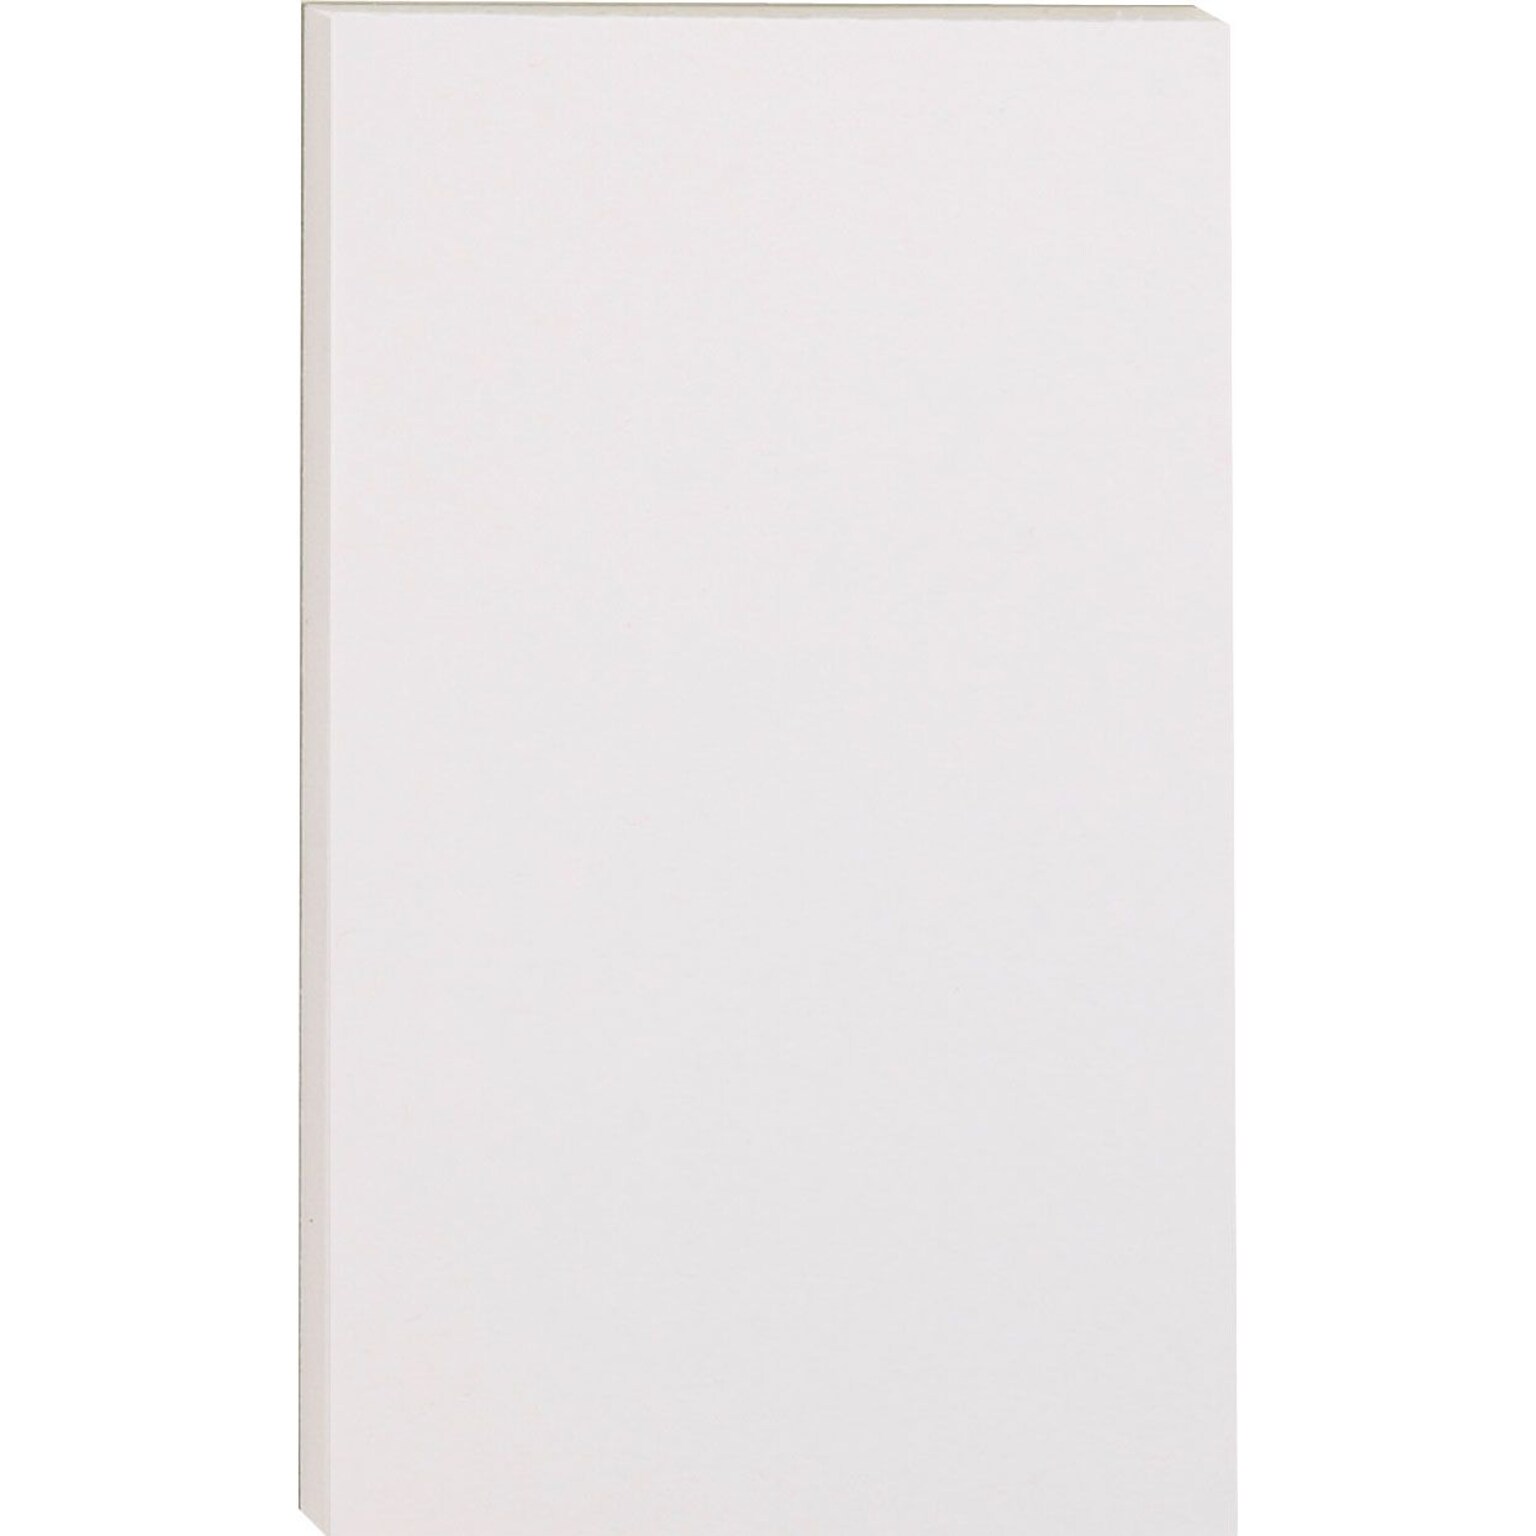 Staples Notepads, 5 x 8, Unruled, White, 100 Sheets/Pad, Dozen Pads/Pack (ST57329)